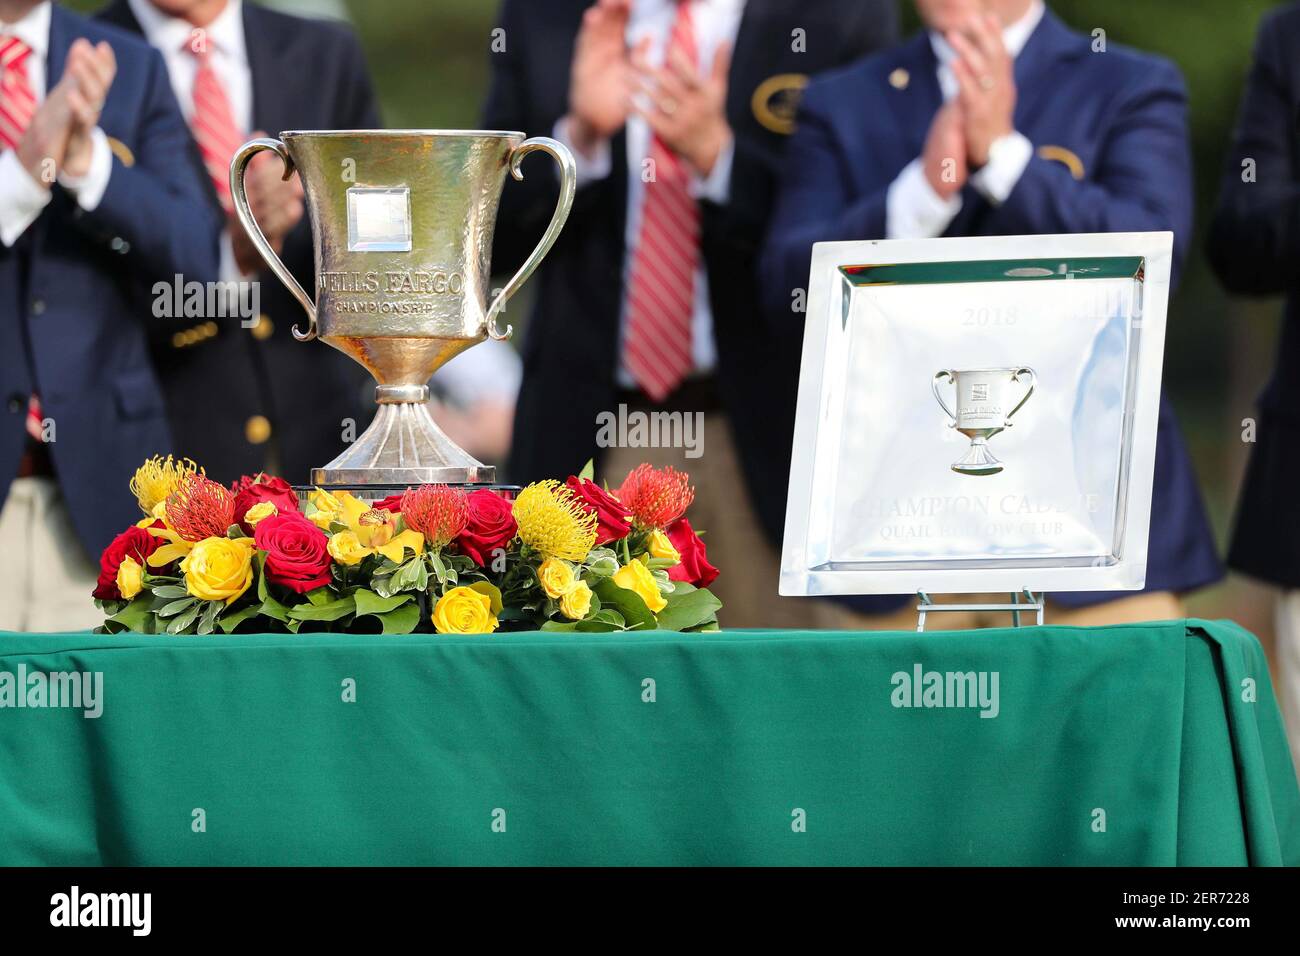 May 6, 2018; Charlotte, NC, USA; Trophies for the Wells Fargo Championship during the final round of the Wells Fargo Championship golf tournament at Quail Hollow Club. Mandatory Credit: Jim Dedmon-USA TODAY Sports Stock Photo